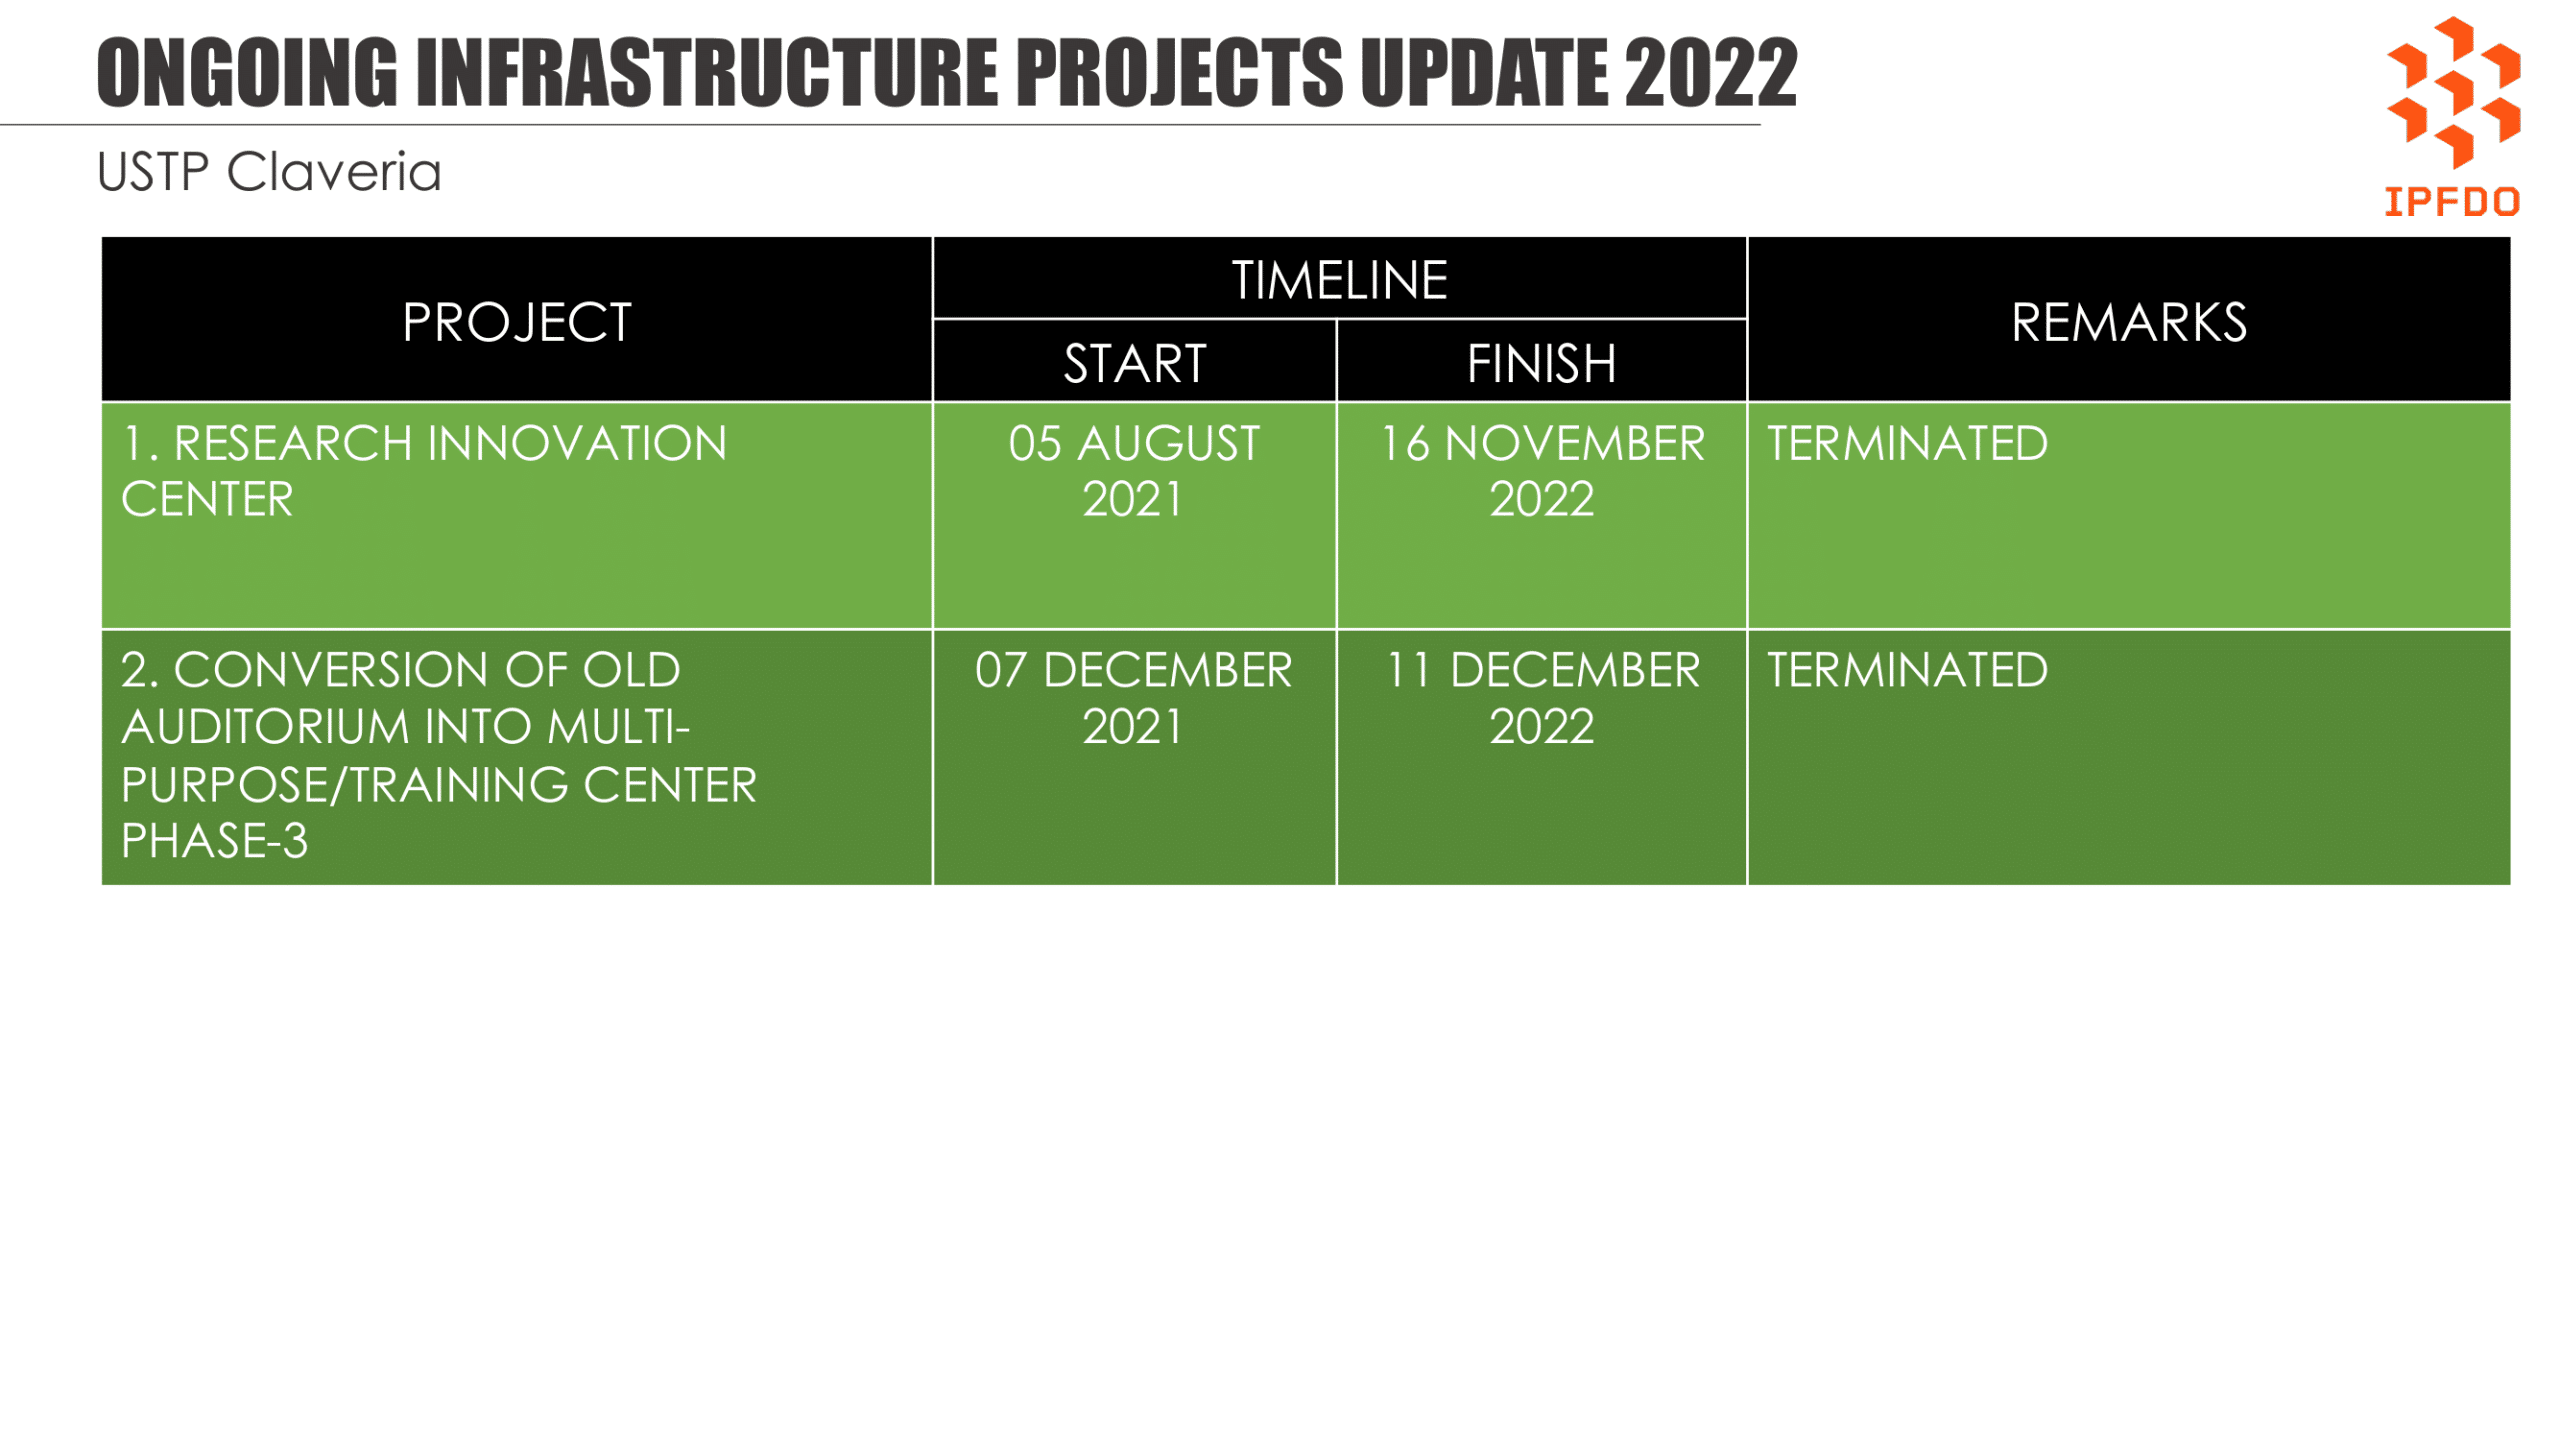 Ongoing Infrastructure Projects Update 2022 - USTP Claveria